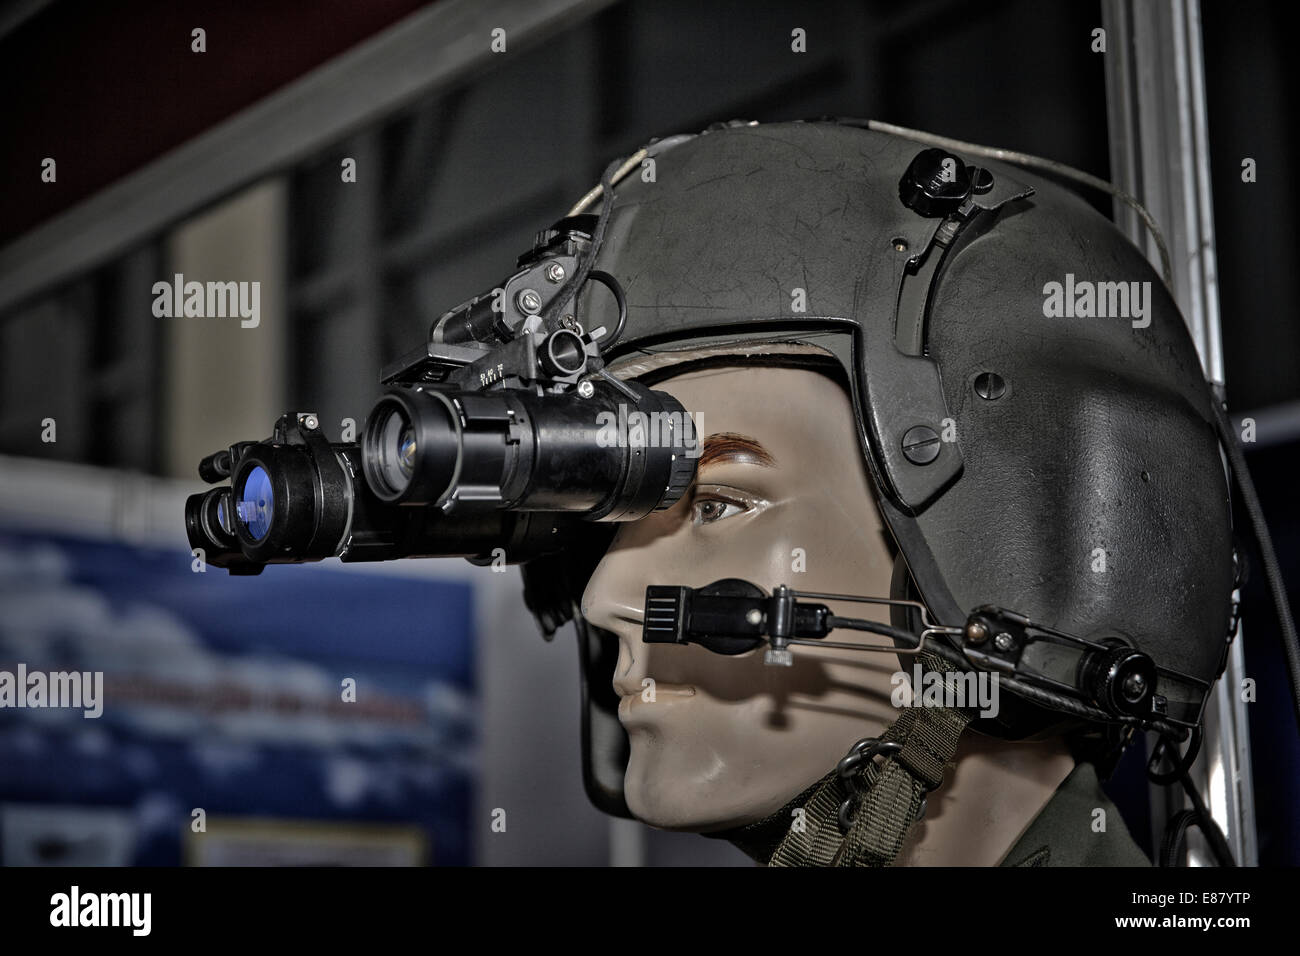 Night vision military technology on display at a Thailand Army Sea Air Rescue (Sarex) display. Thailand S. E. Asia Stock Photo